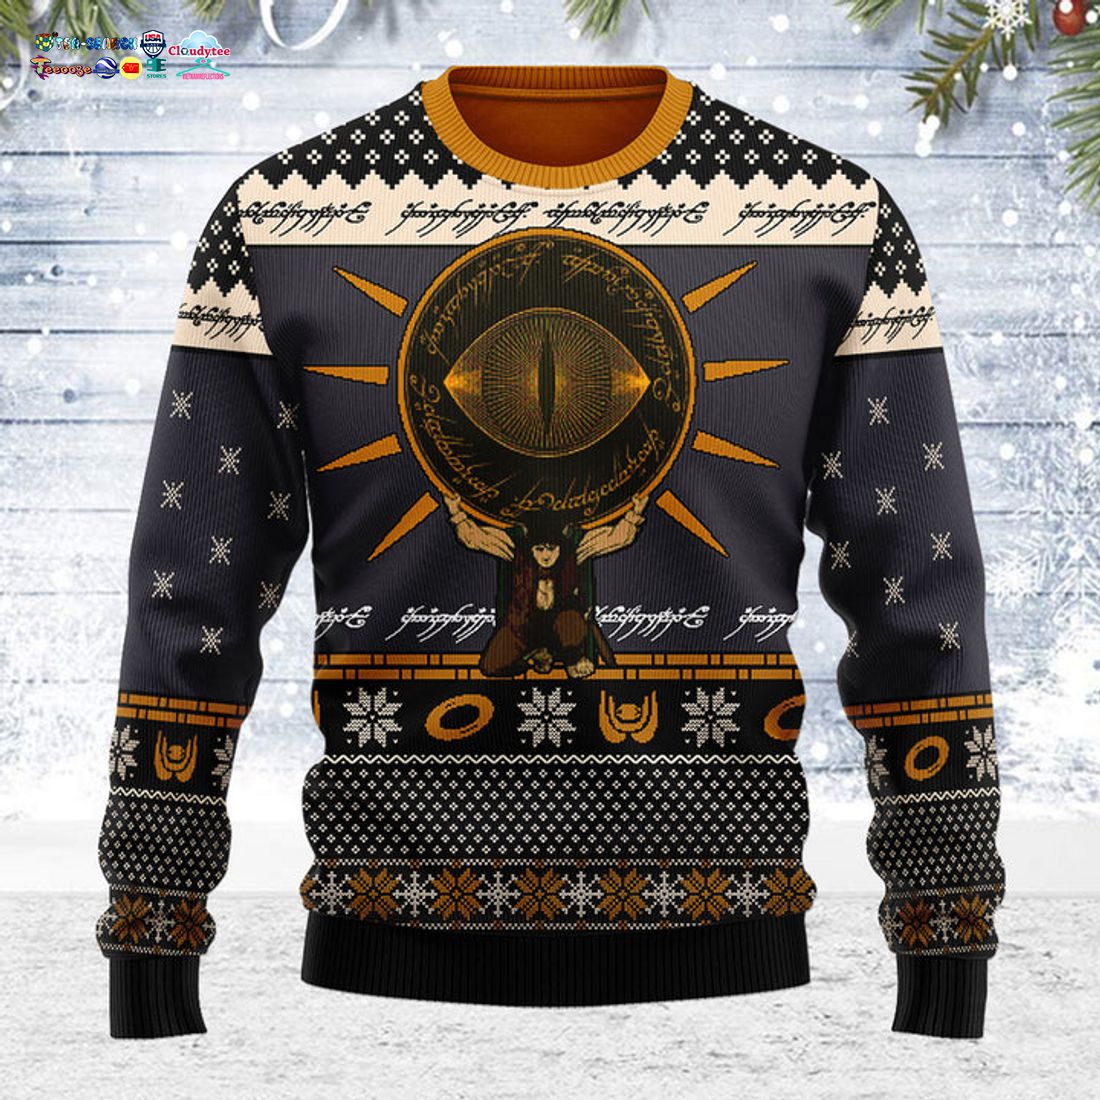 LOTR Burden Ugly Christmas Sweater - Have you joined a gymnasium?